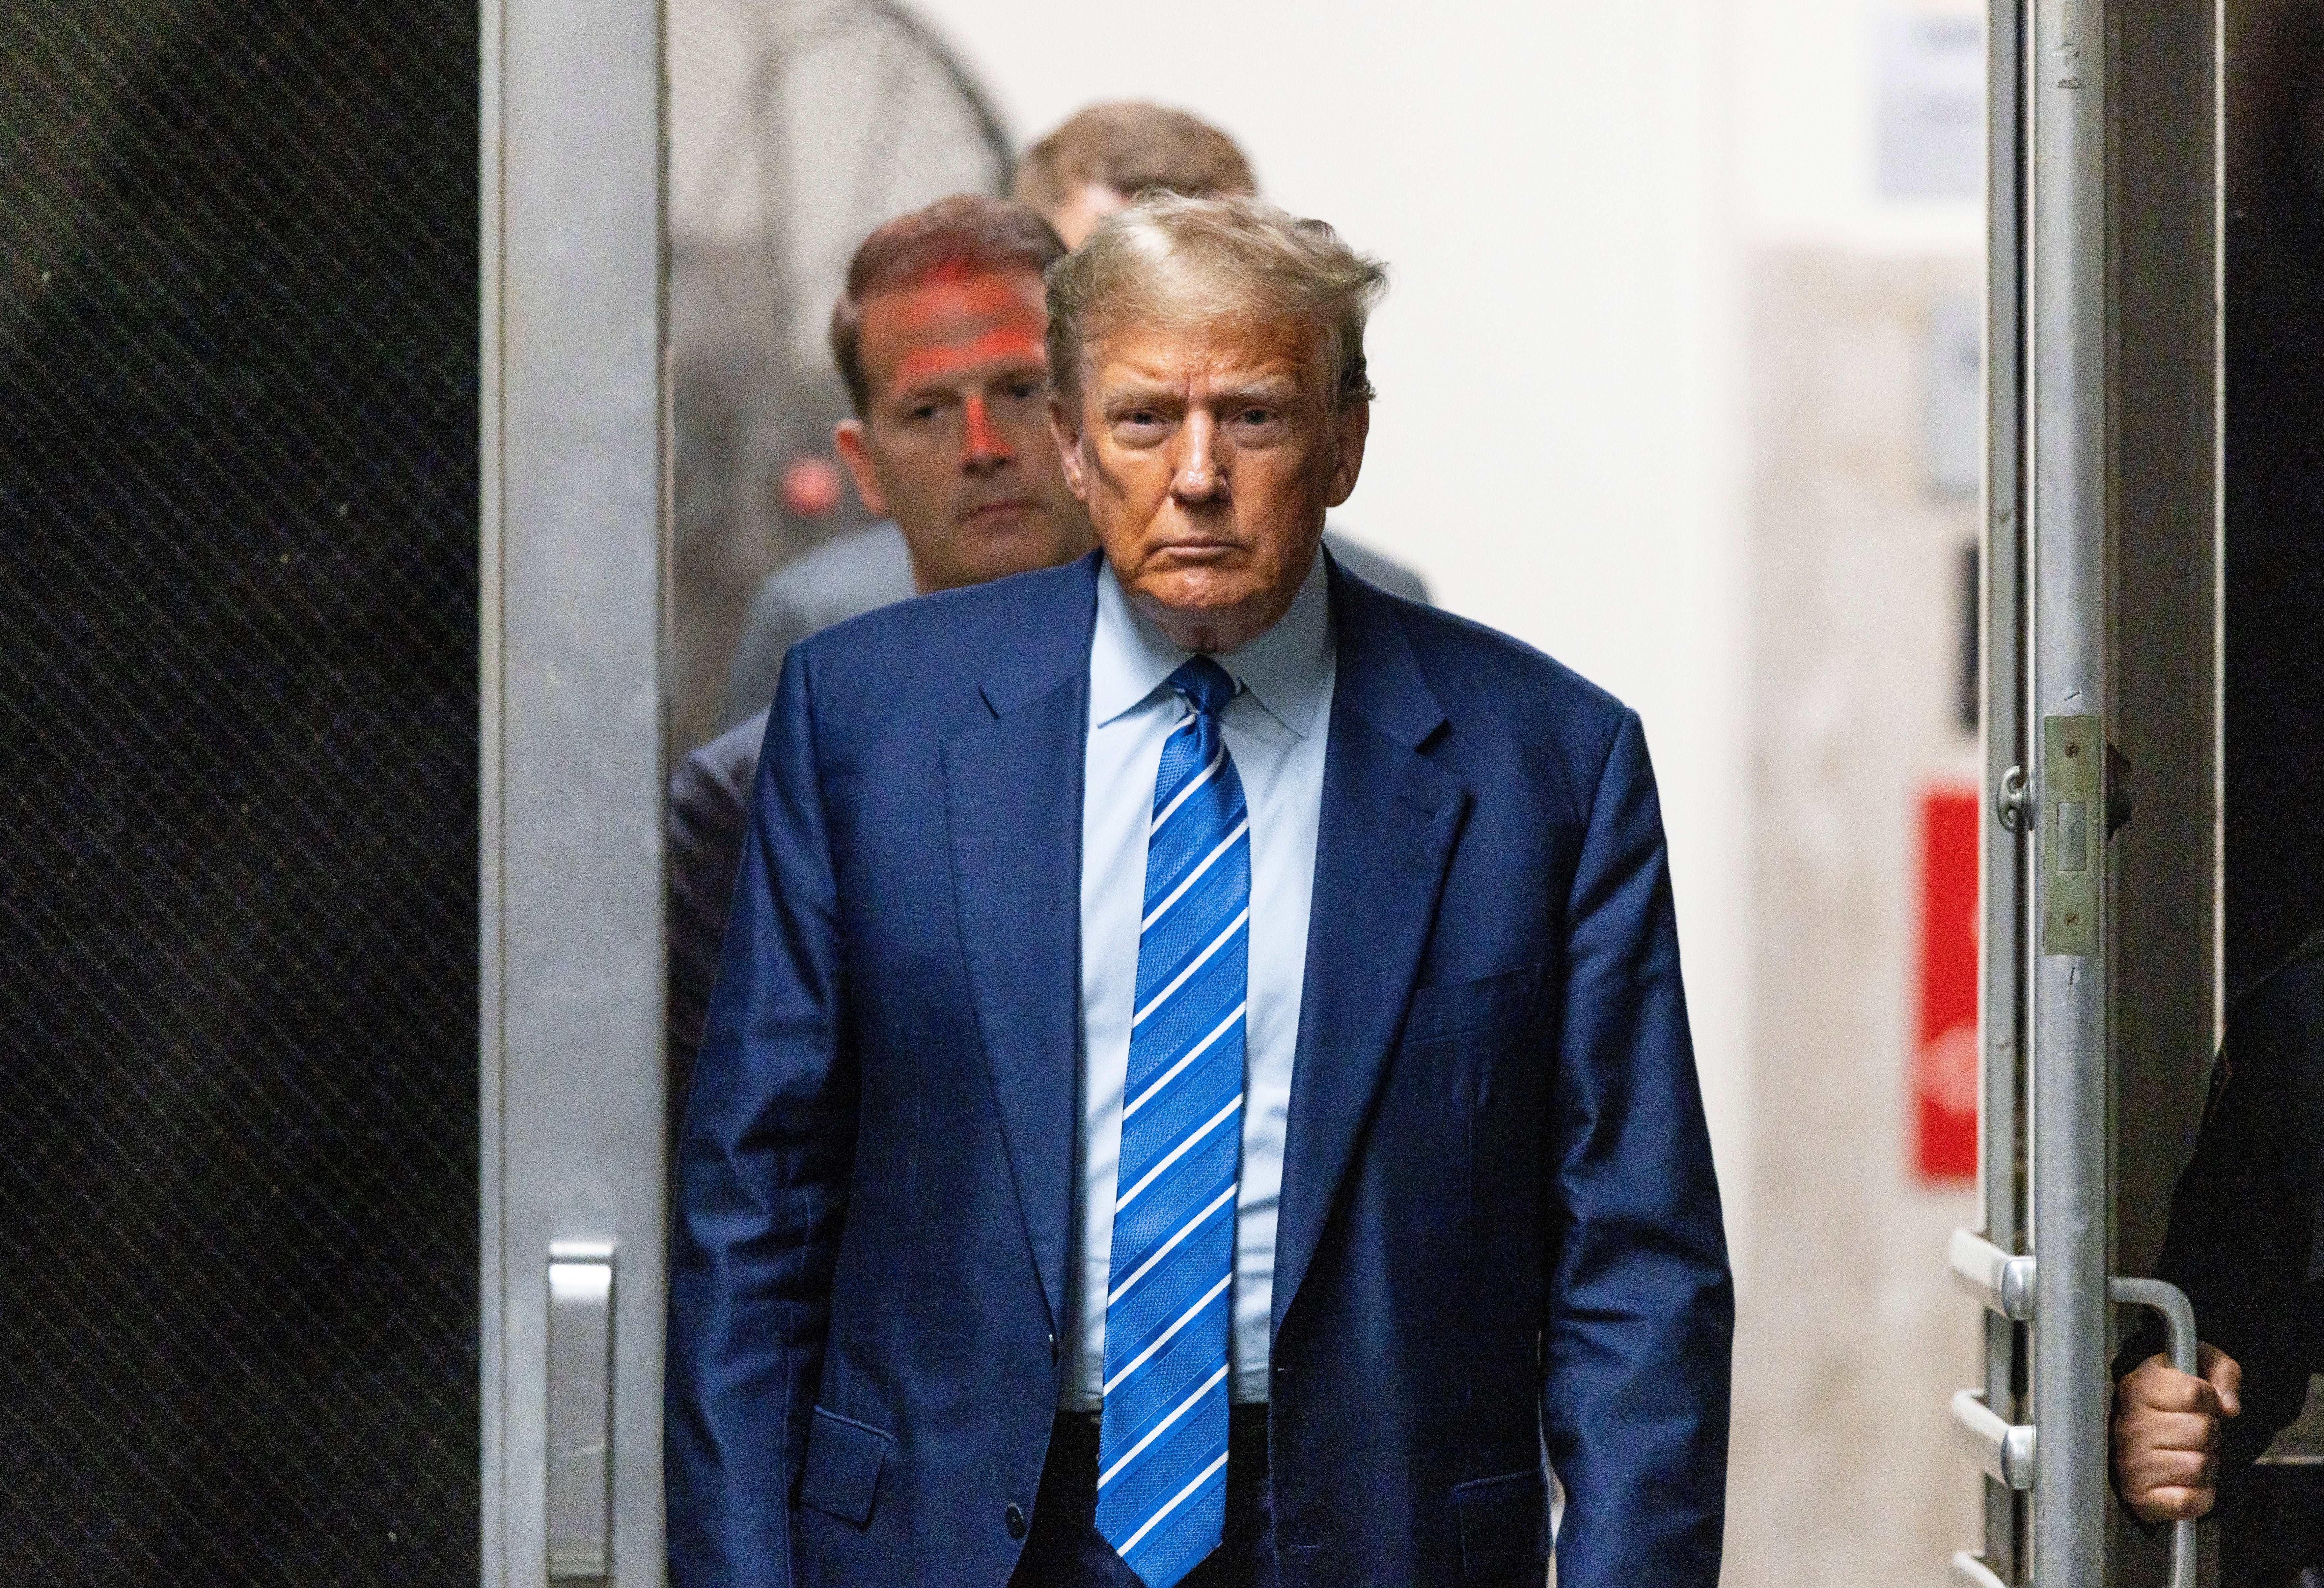 Donald Trump appears in a Manhattan criminal courthouse on Tuesday